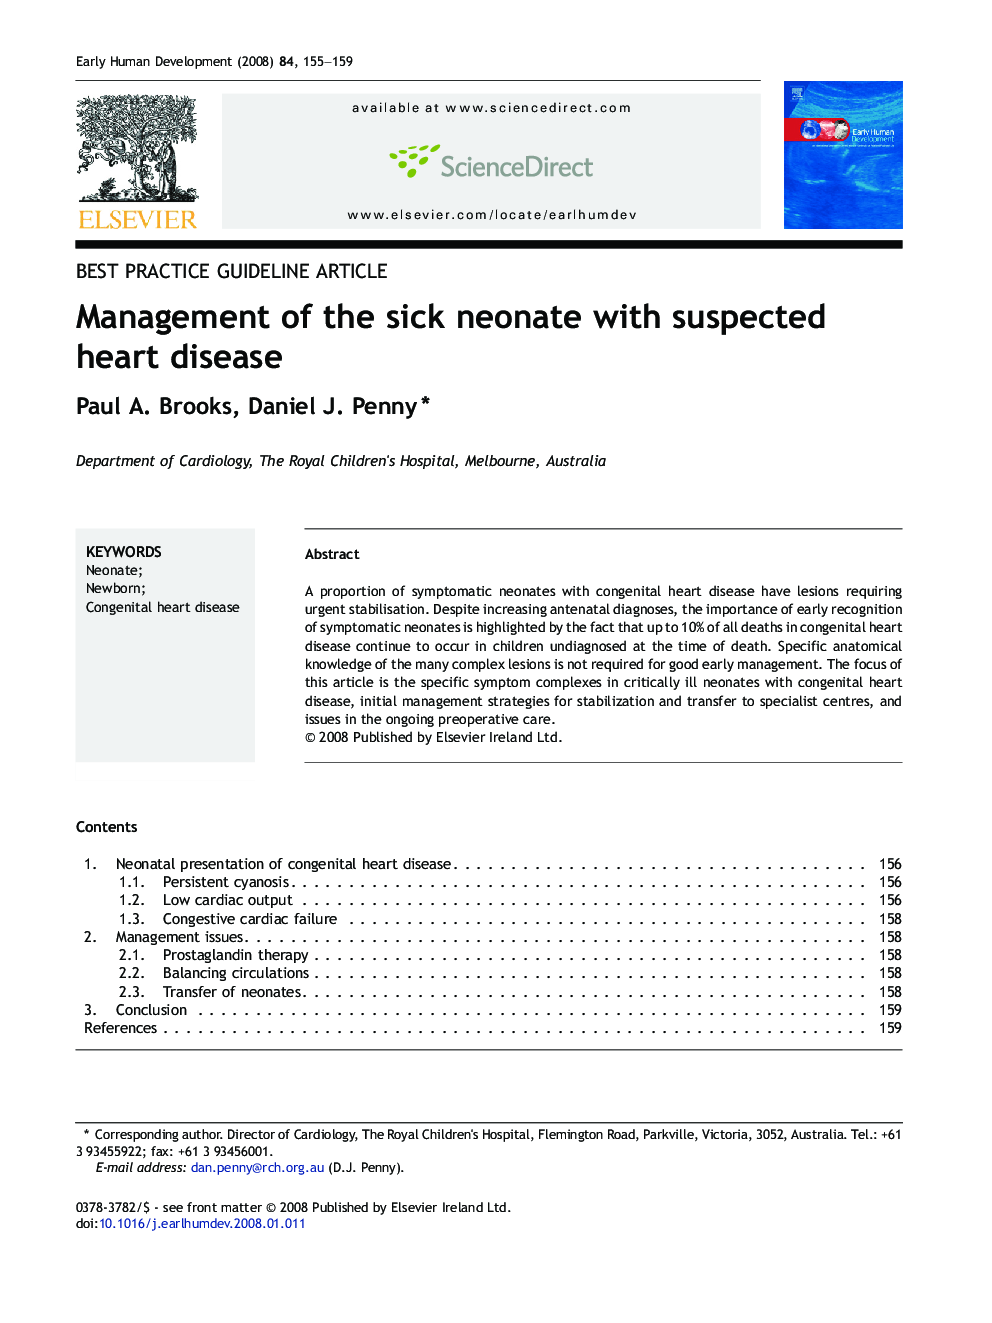 Management of the sick neonate with suspected heart disease